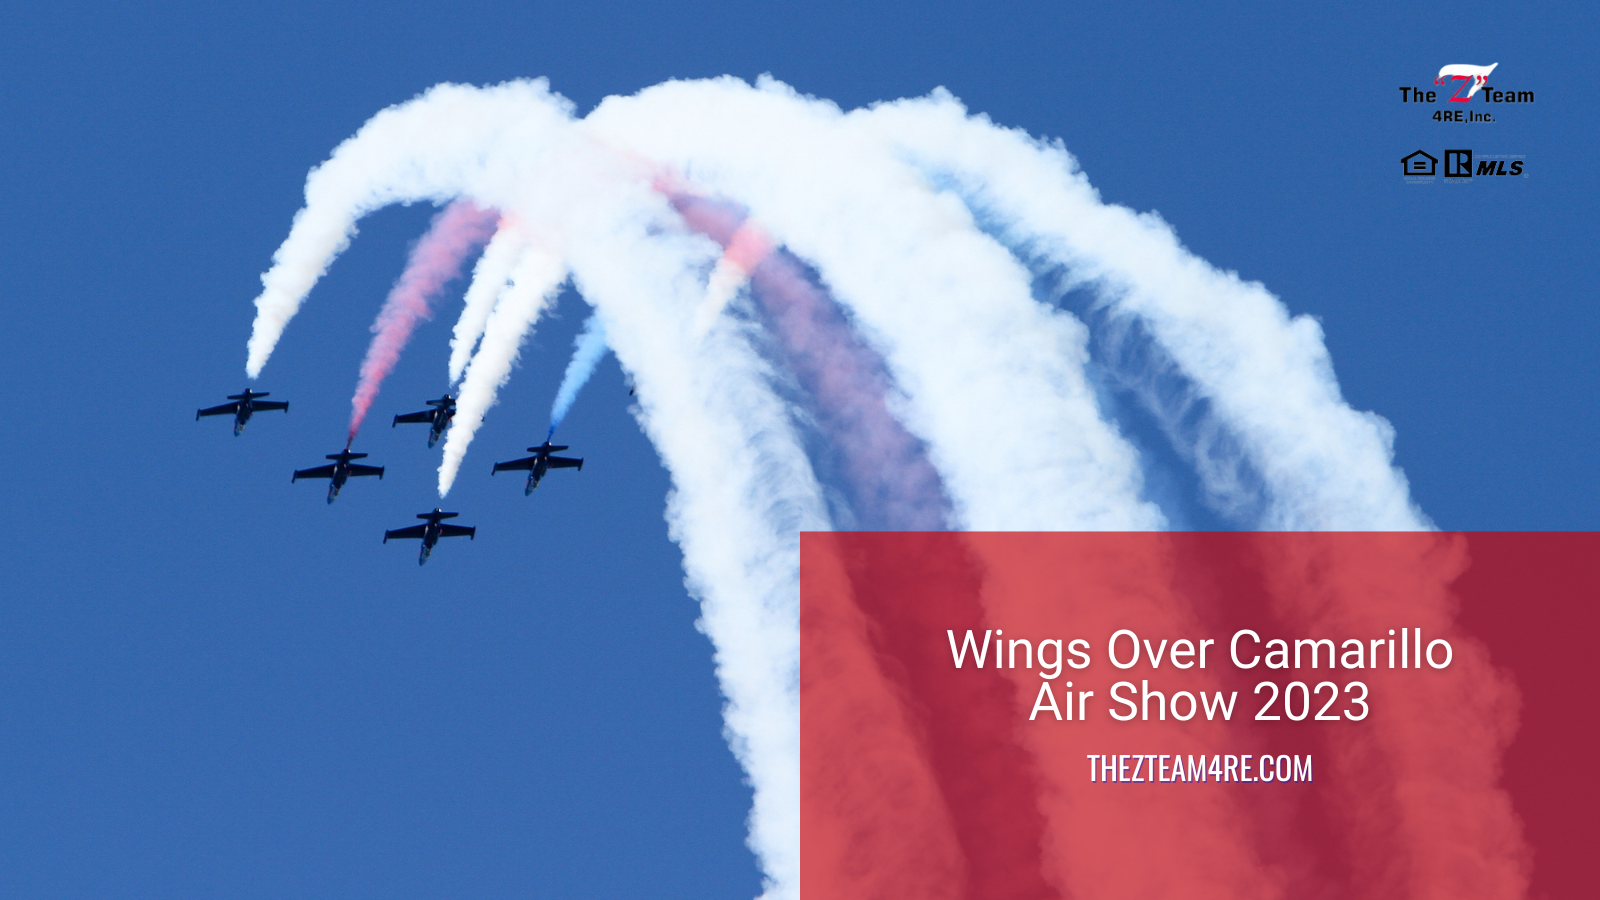 Wings_Over_Camarillo_Air_Show_2023_lg.png